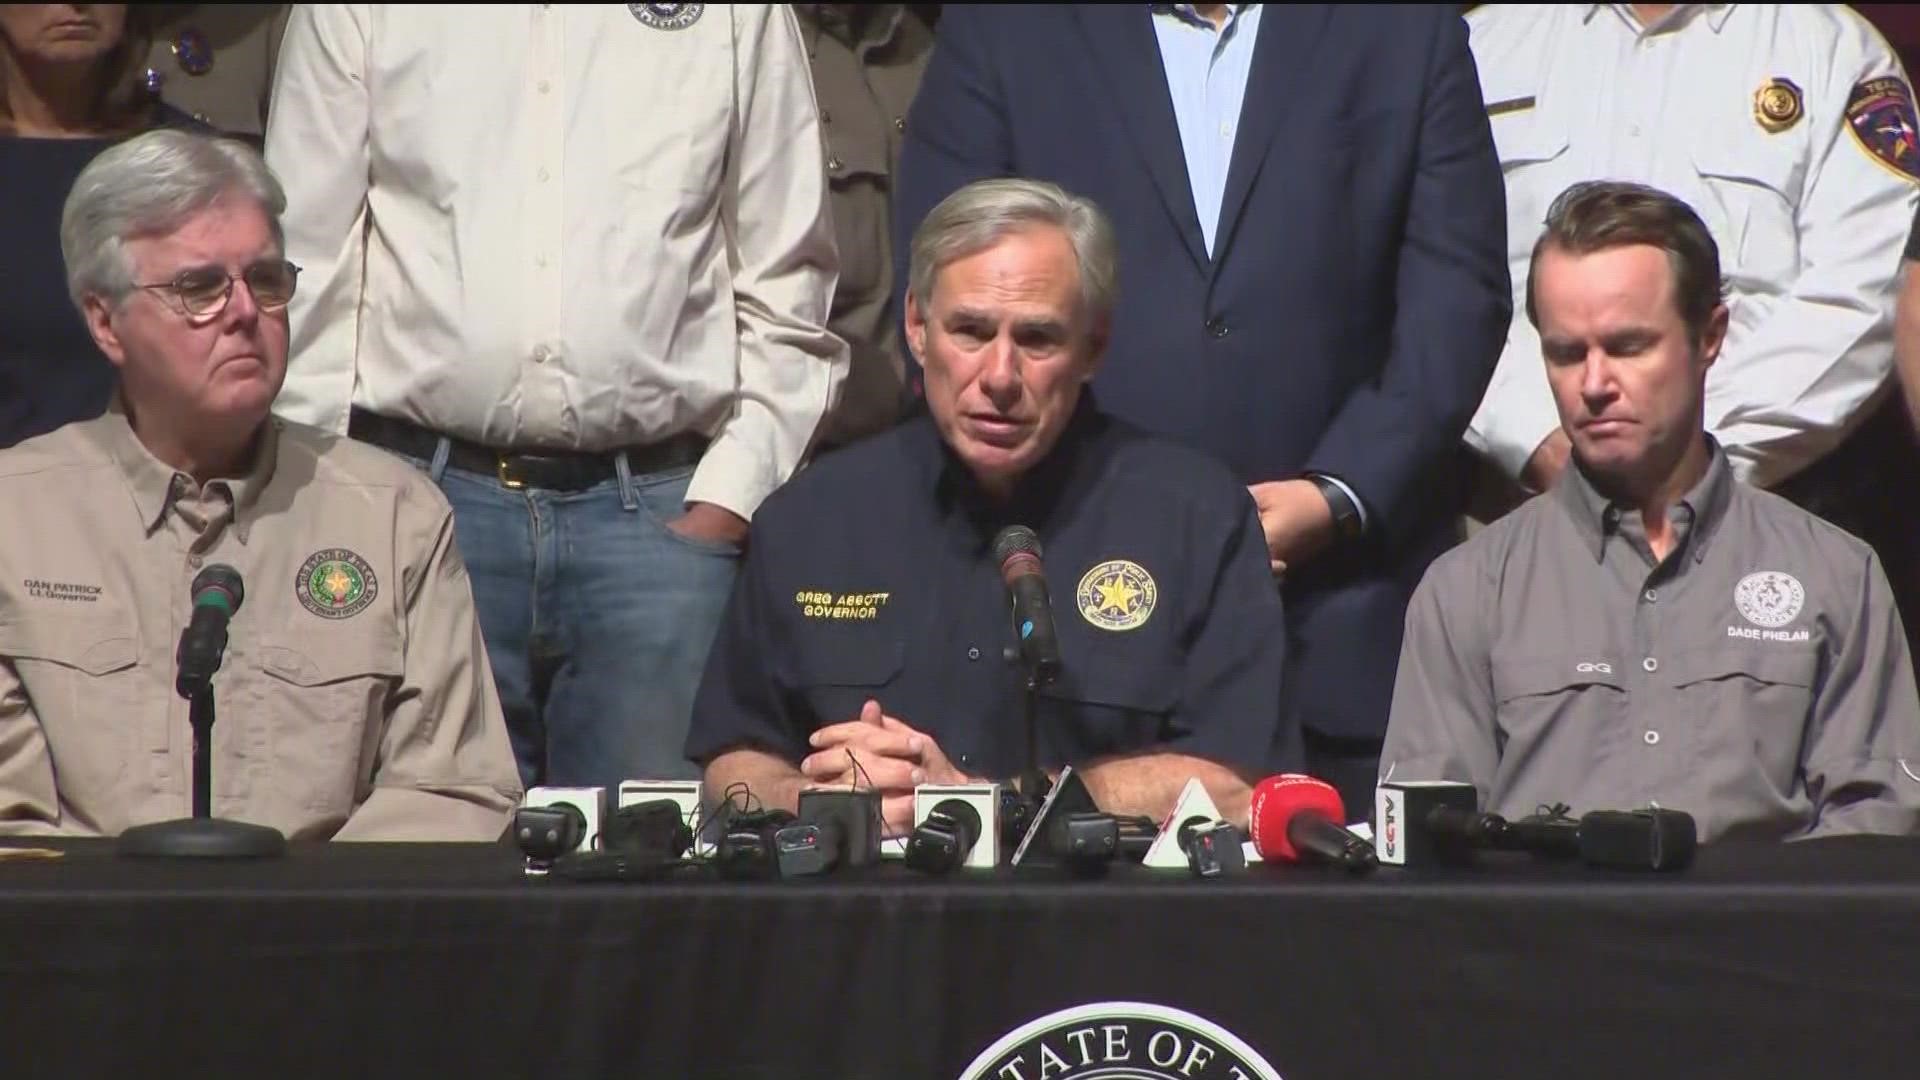 Following the Uvalde shooting, Gov. Abbott mentioned the 17 bills he signed in 2019 after the 2018 mass shooting at Santa Fe High School. We have a look at them.